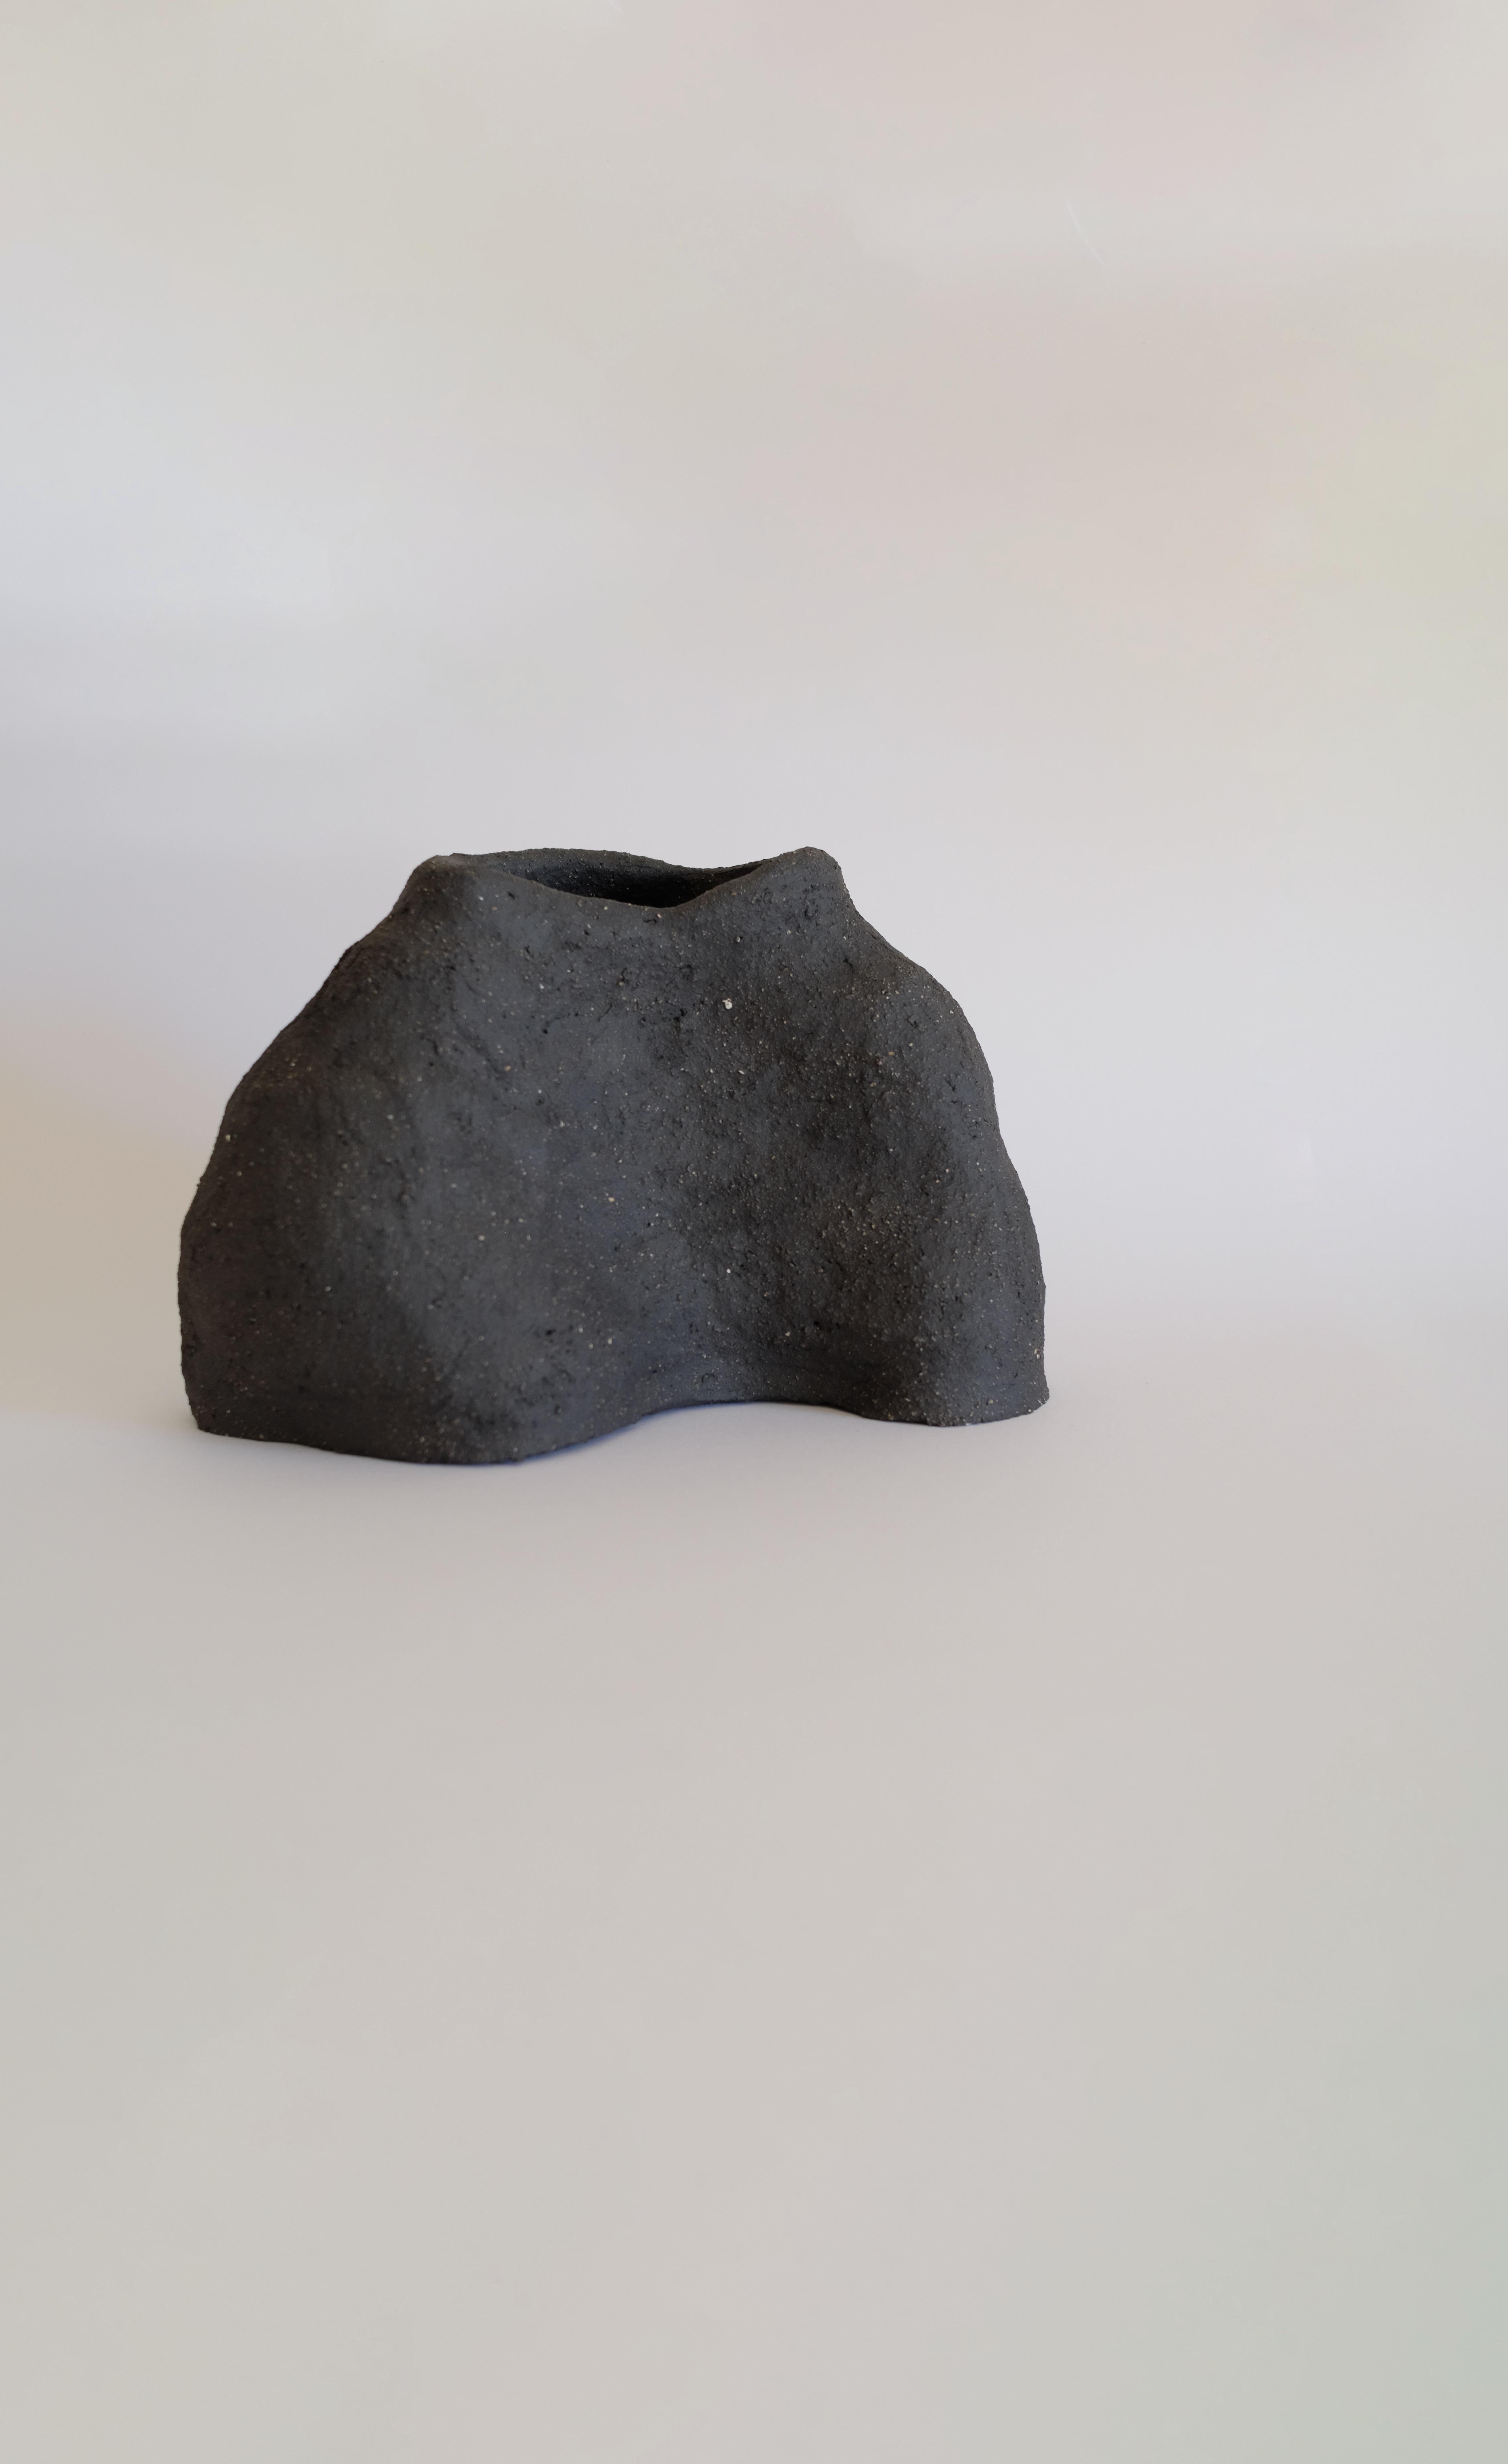 Moon Granite II vase by Sophie Parachey
Dimensions: W 17 x D 20 x H 30 cm
Materials: Black textured stoneware (large chamotte).

Inspired by extended stays in Central America, Sophie Parachey’s work questions transformation, the antagonism